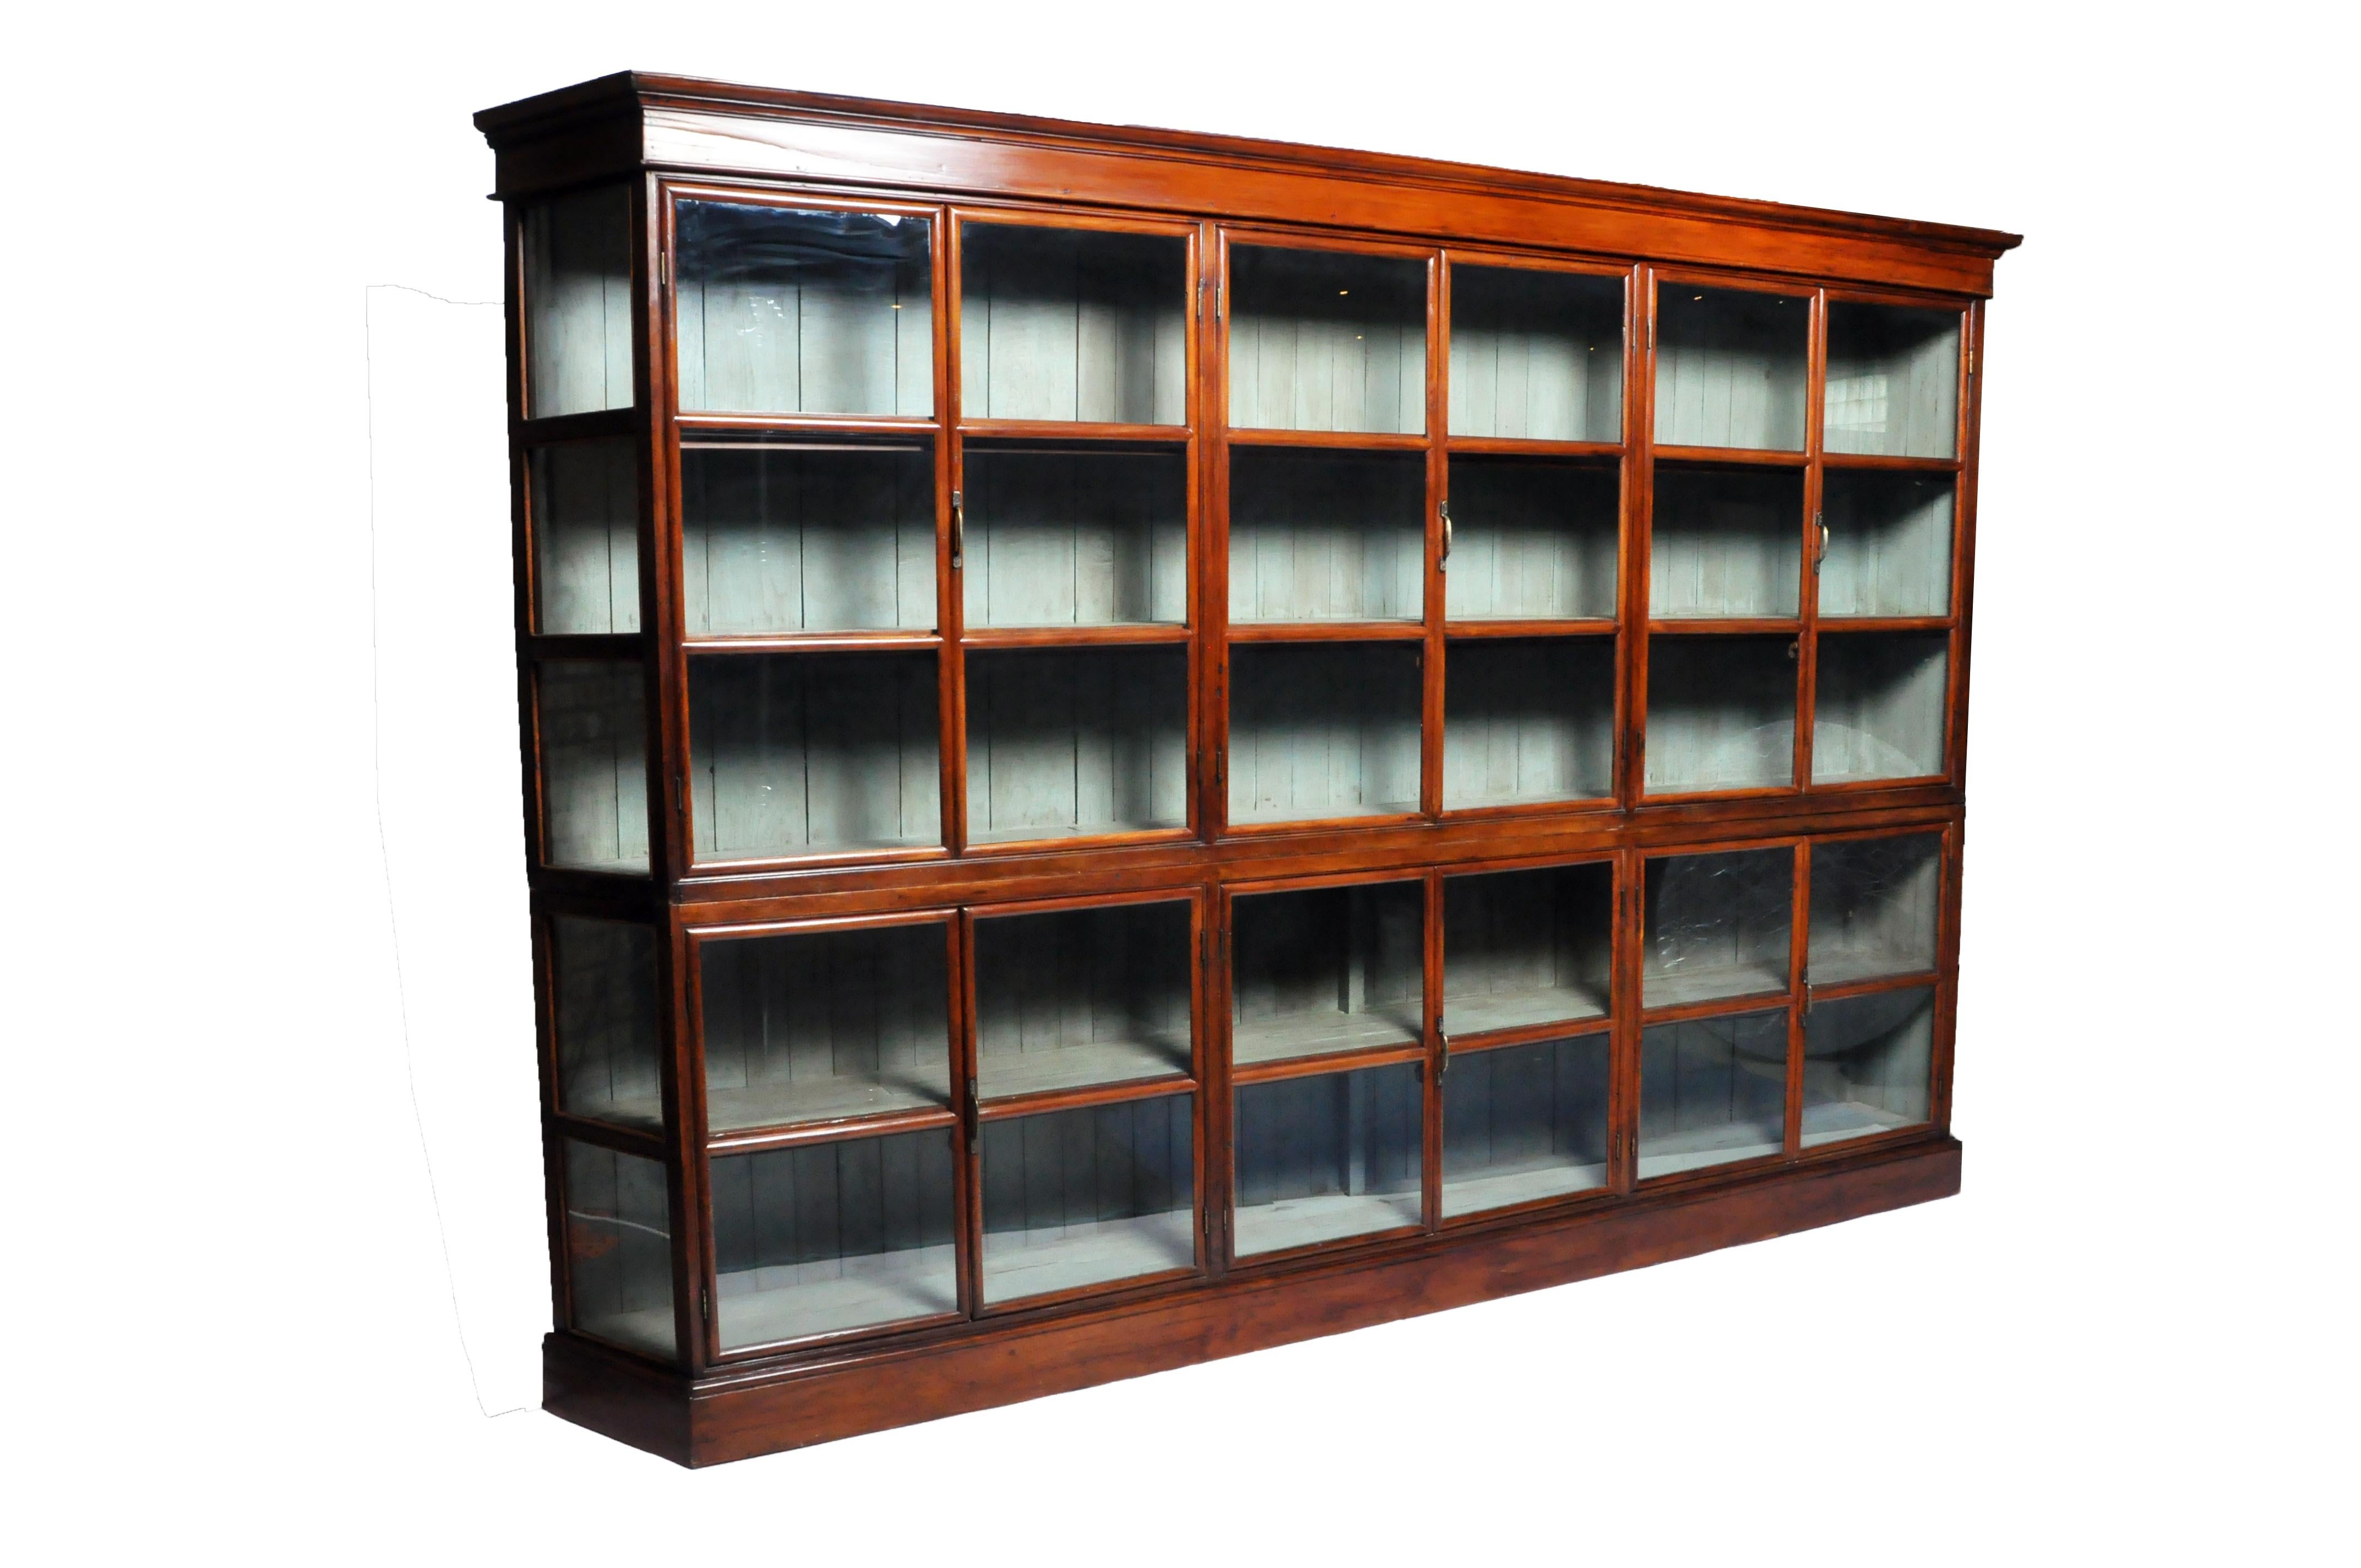 This impressive cabinet comes in two parts; the top has three sets of glass pane doors that open to shelves on top and three sets of glass pane doors on the bottom for additional storage. Its scale and ample storage make this a perfect book display